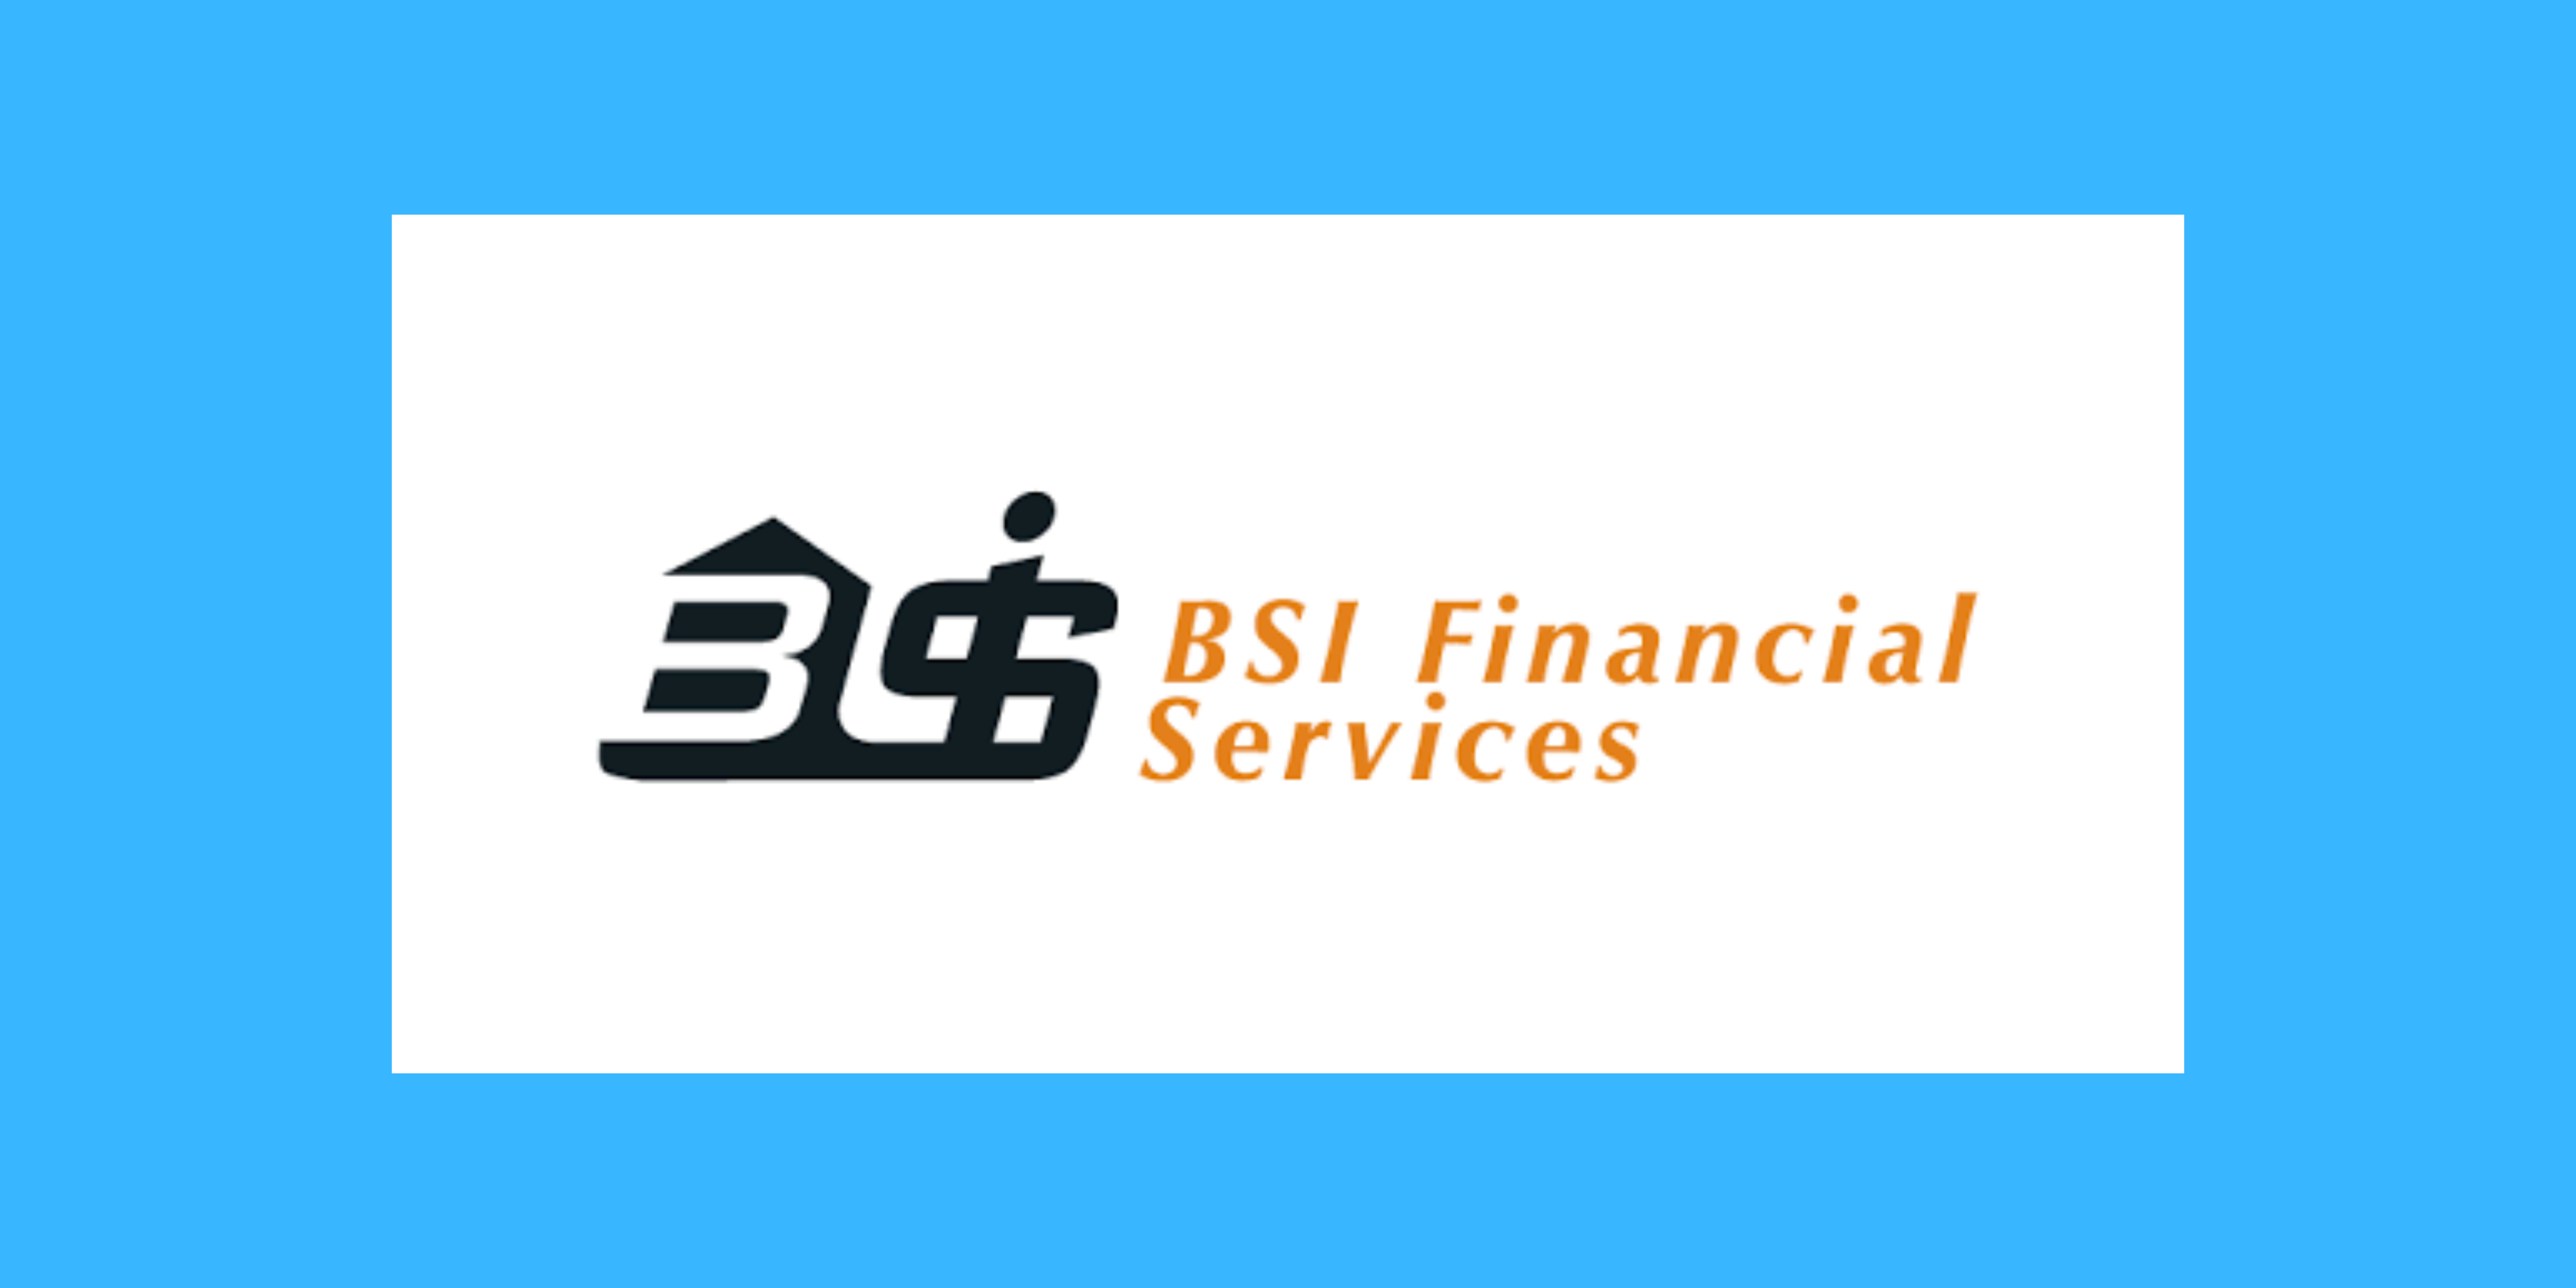 Harold Lewis Joins BSI Financial As President, COO